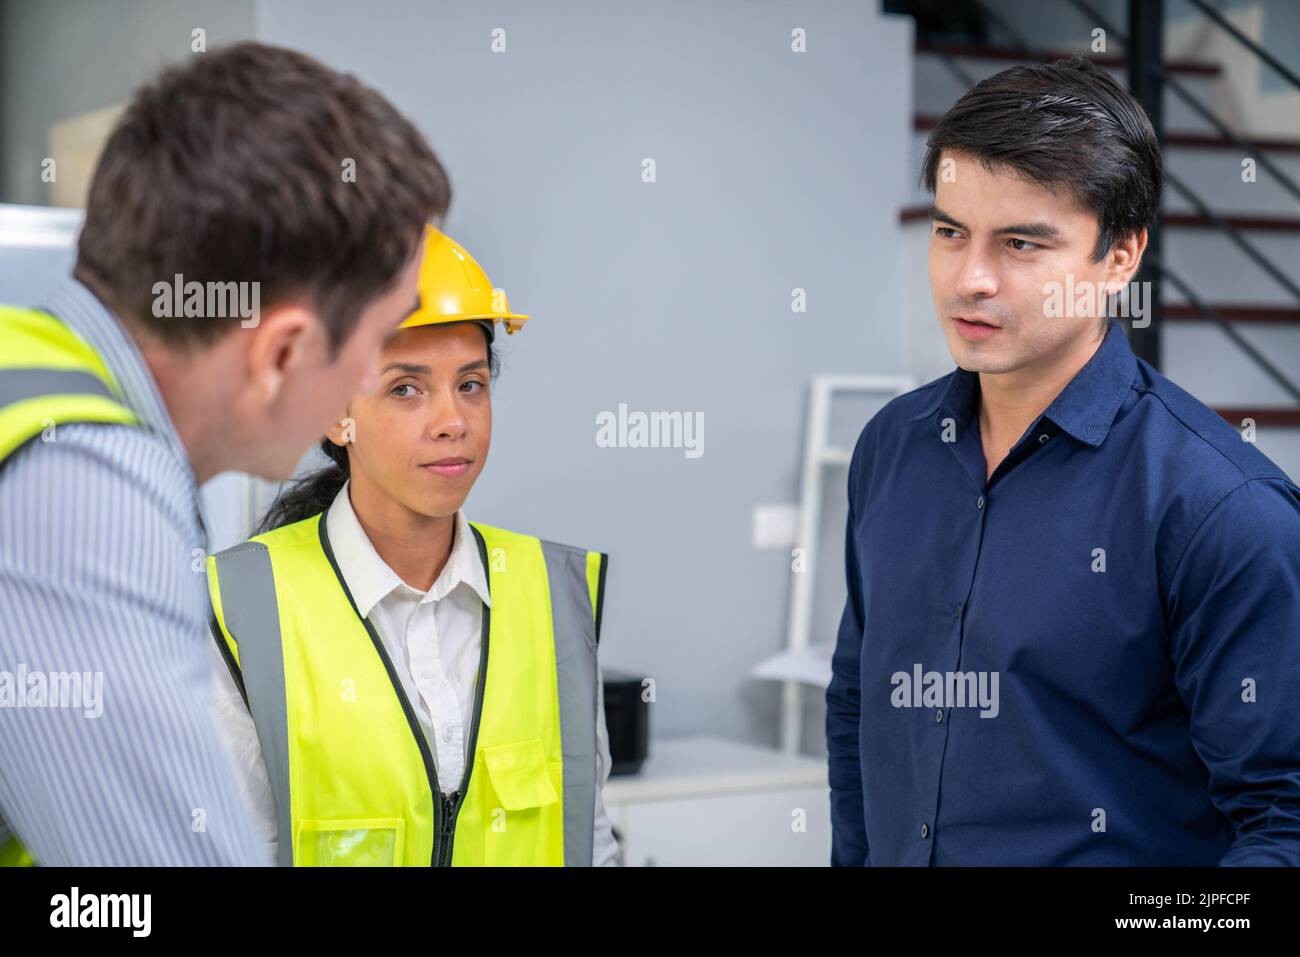 A competent investor investor briefs his engineers on blueprints or construction plans before putting them into action. Concept of investment plans Stock Photo